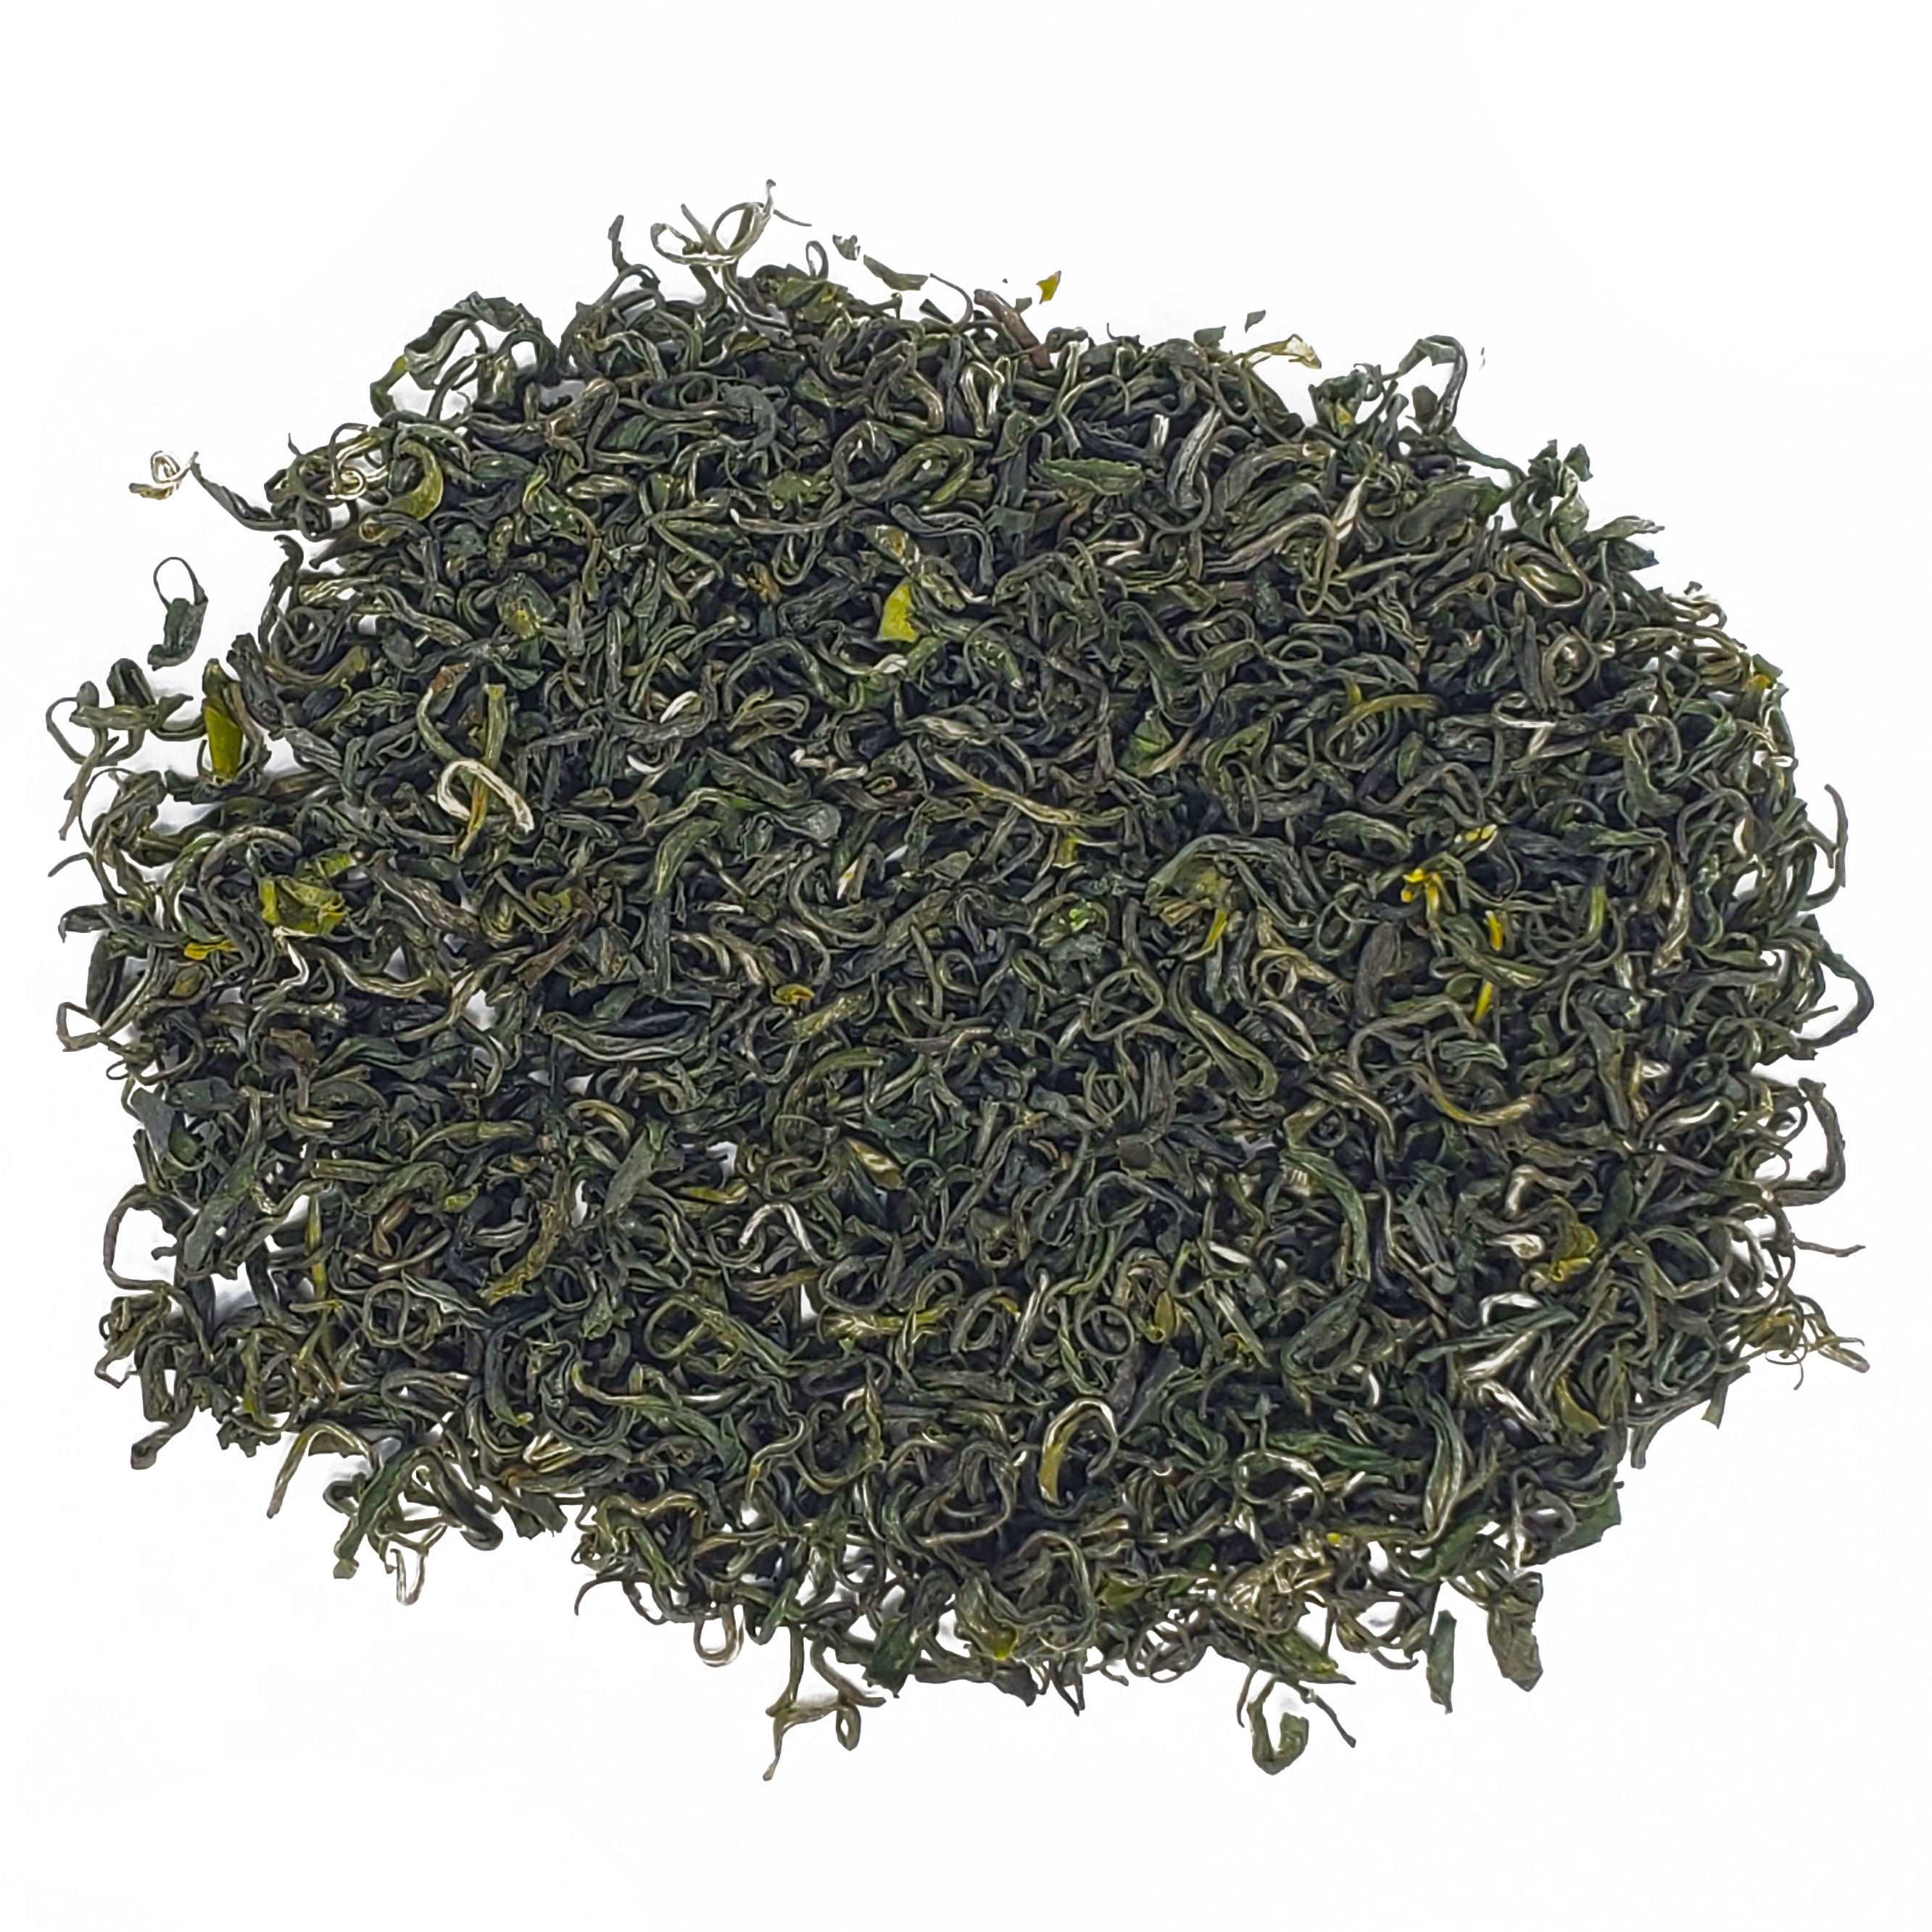  2022 Clouds & Mist Green Tea by Tea and Whisk Tea and Whisk Perfumarie